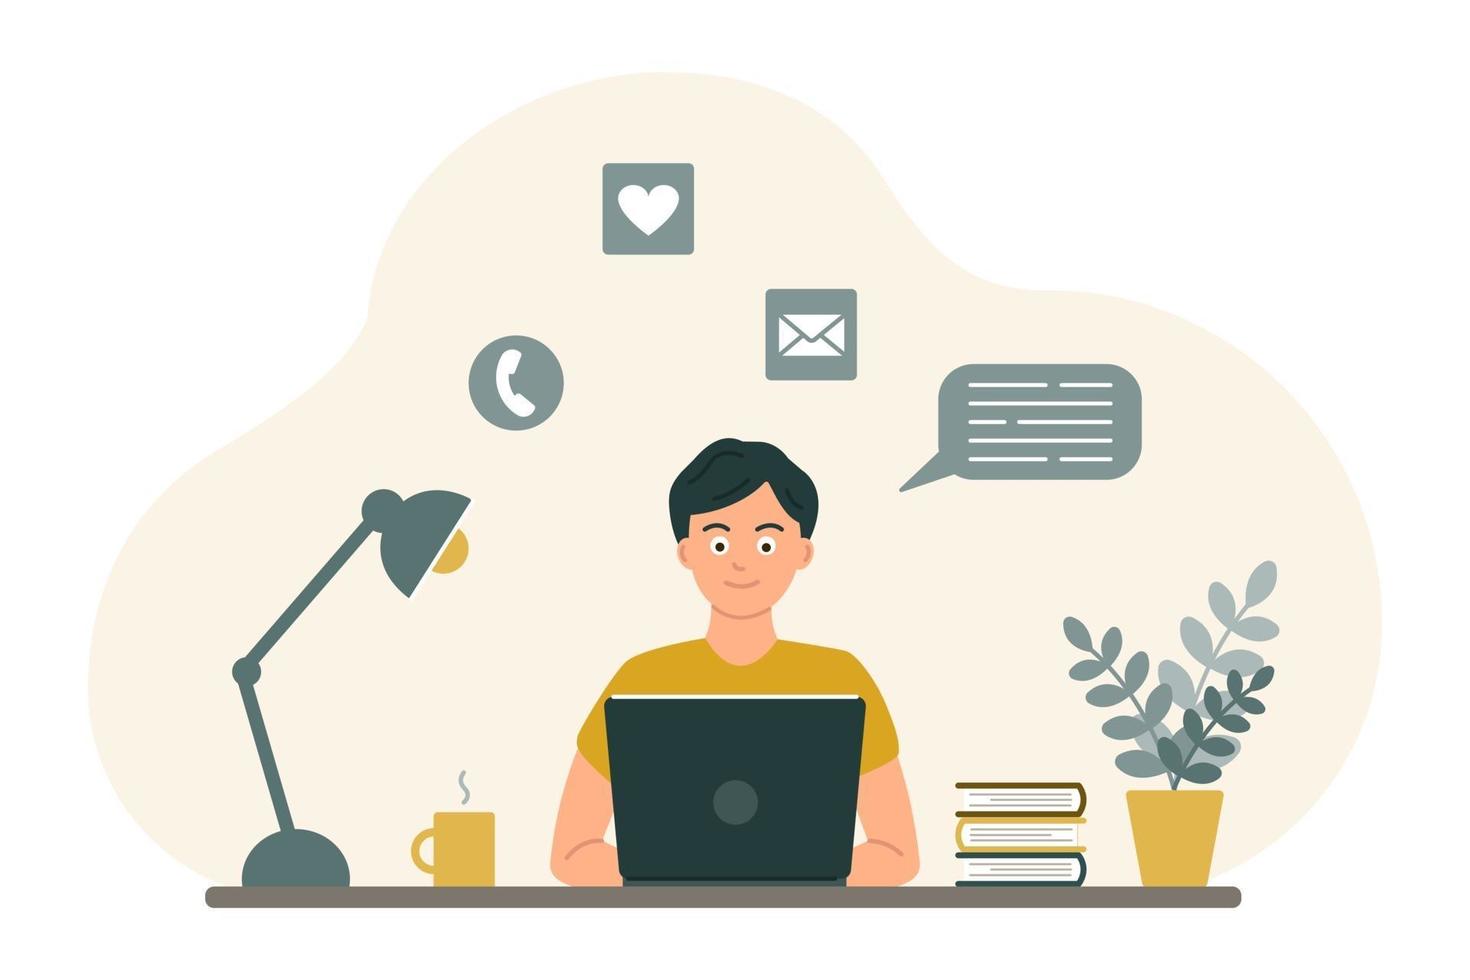 The guy at the desk looks at the laptop screen. The concept of online learning, communication by video, in chats and by mail. Vector image in a flat cartoon style